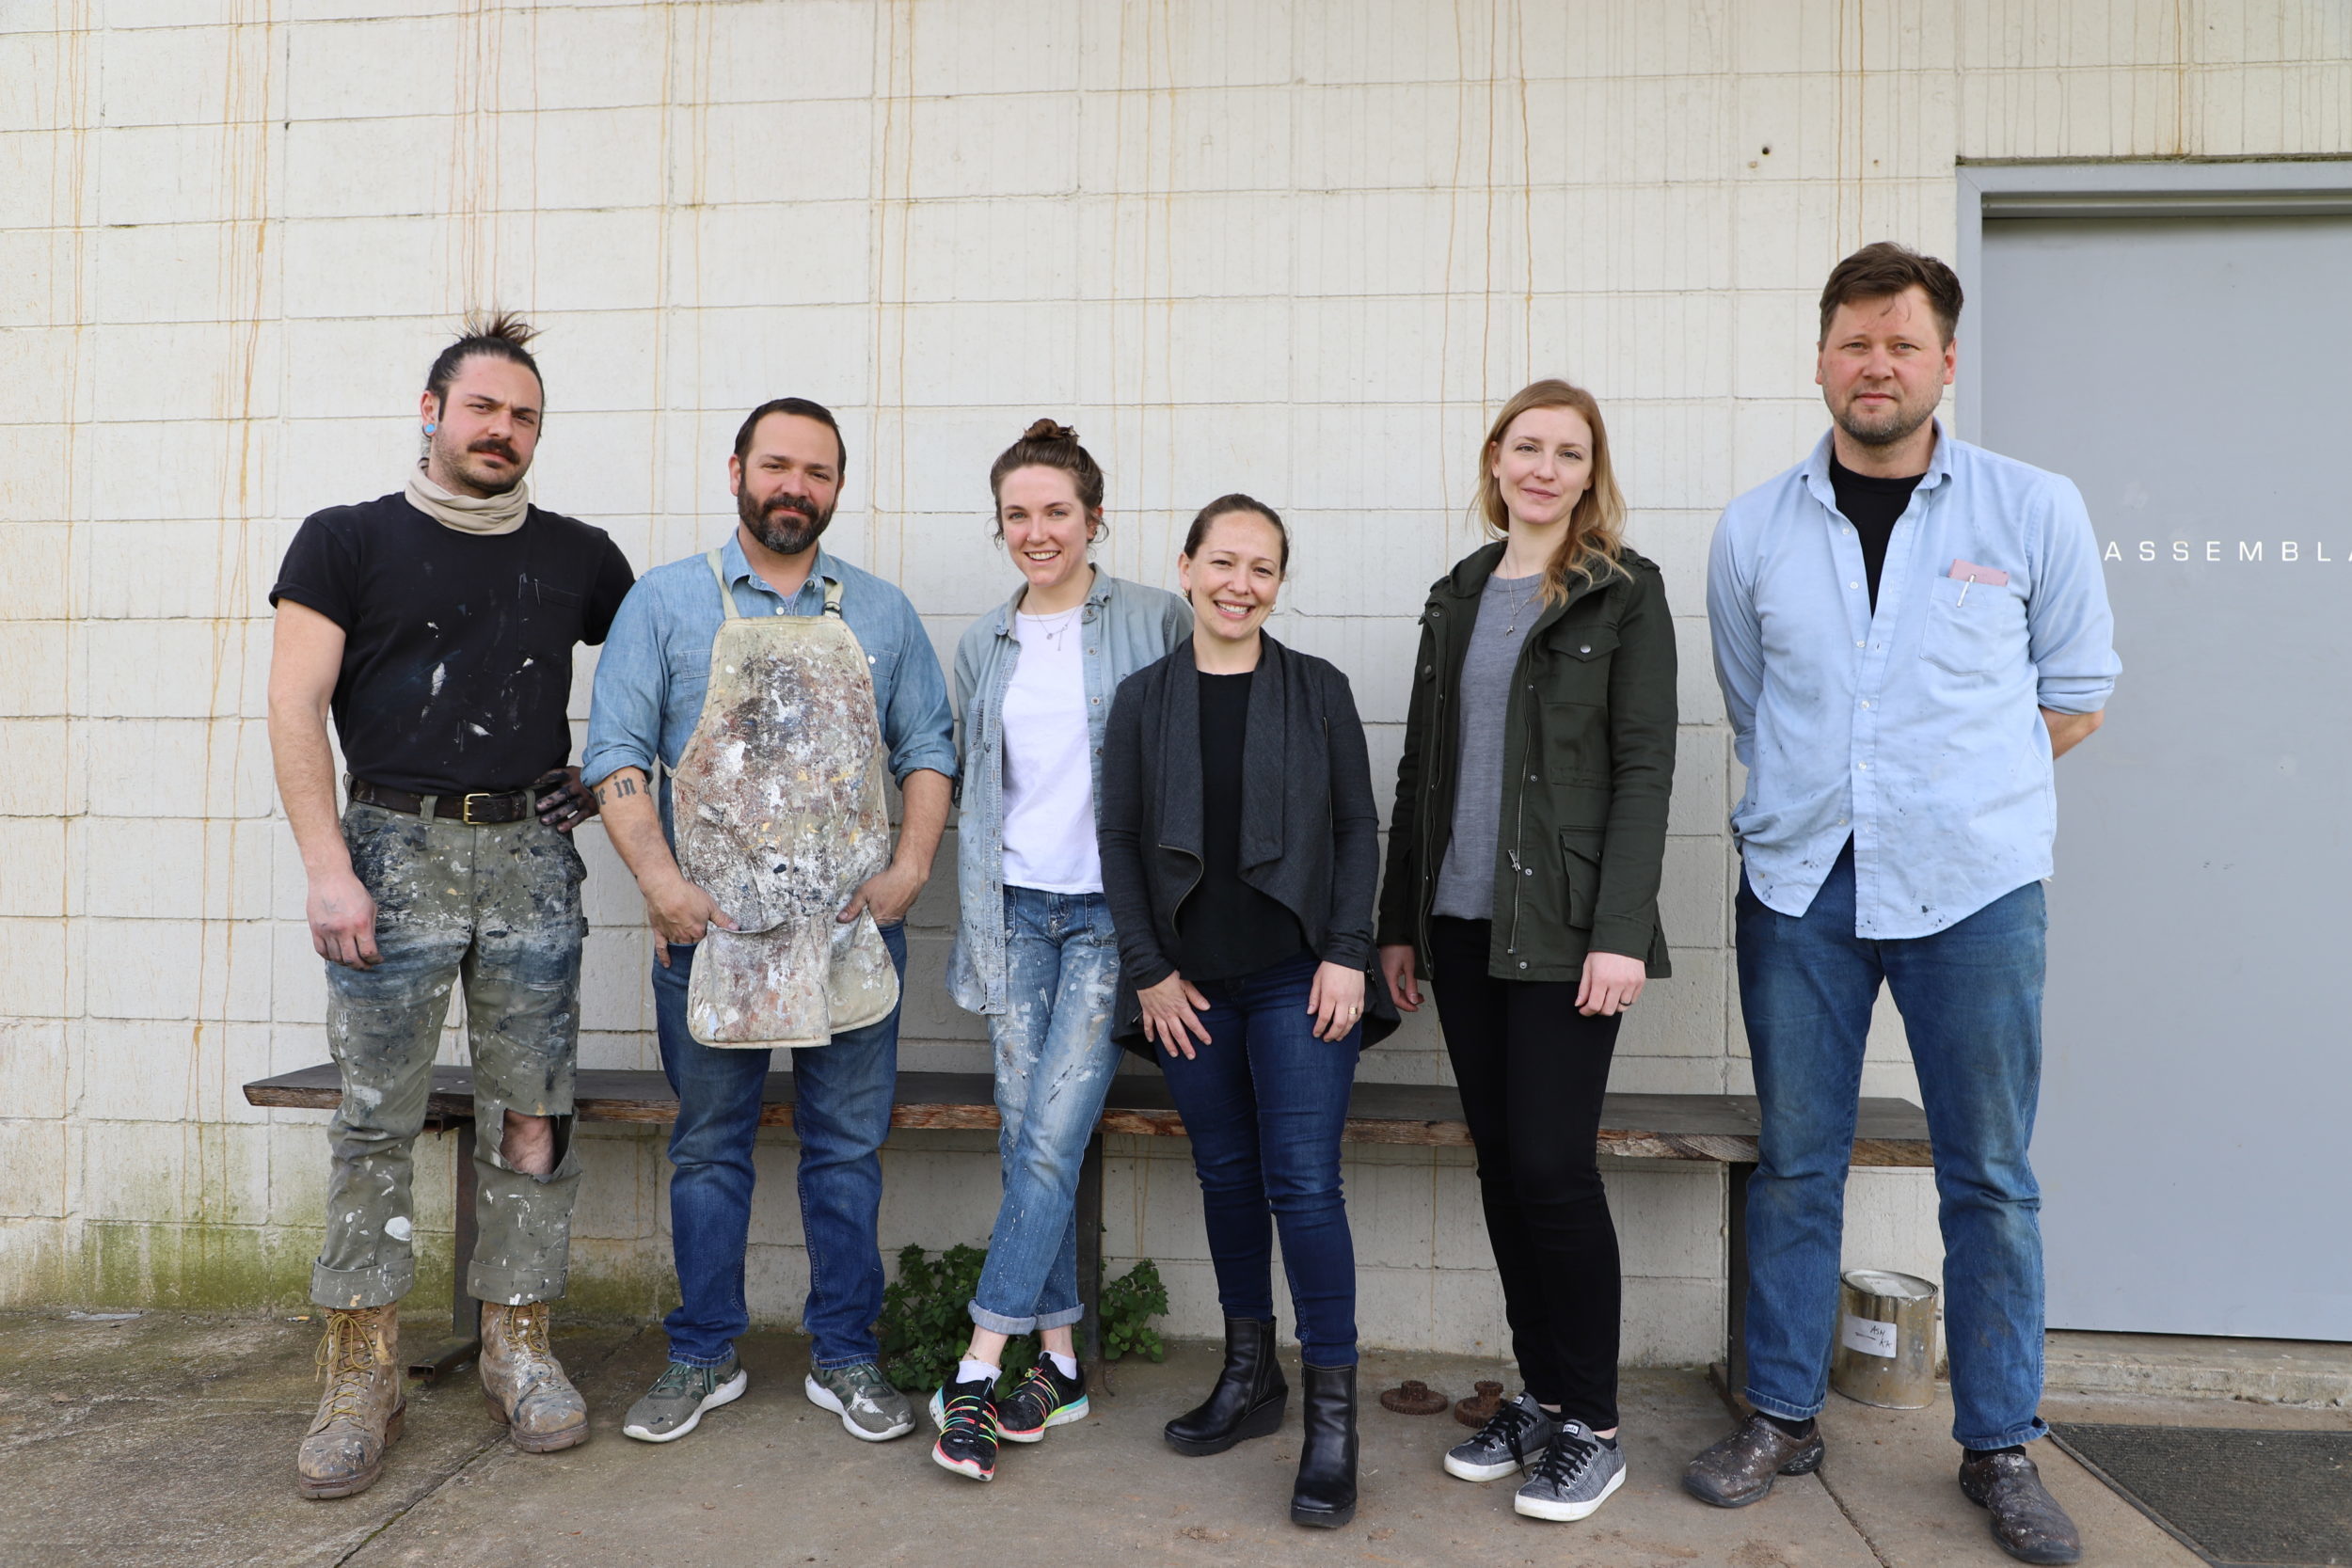 The Assemblage team: Brantley Saylor, Christian Batteau, Taylor White, Heidi Batteau, Amy Smith, and Eric Hille